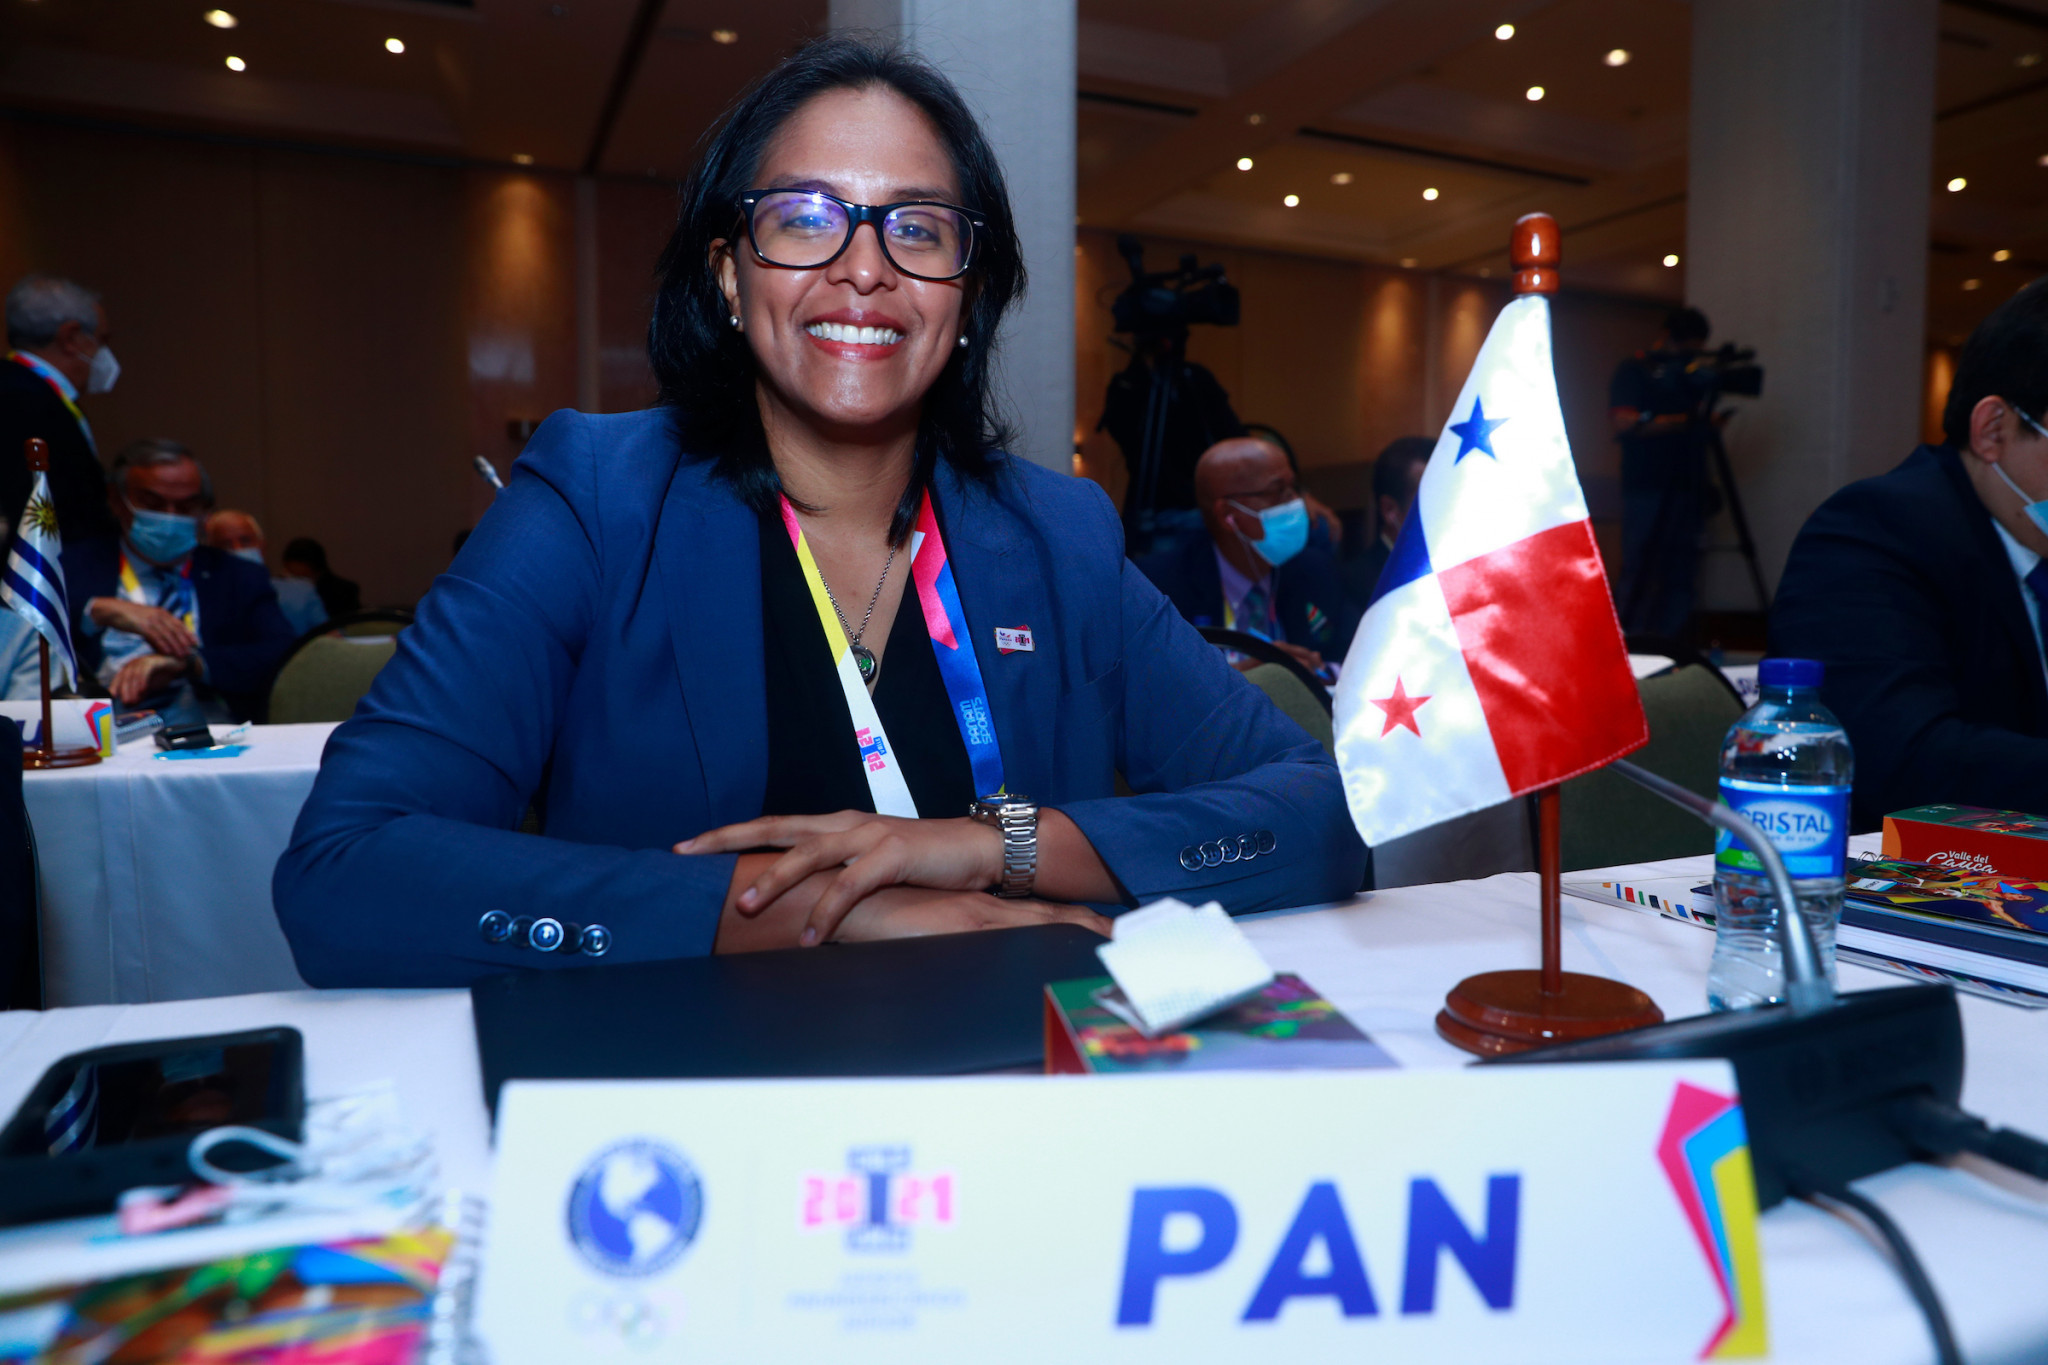 Representatives from 41 Panam Sports countries and territories were in attendance at the General Assembly ©Agencia.XpressMedia